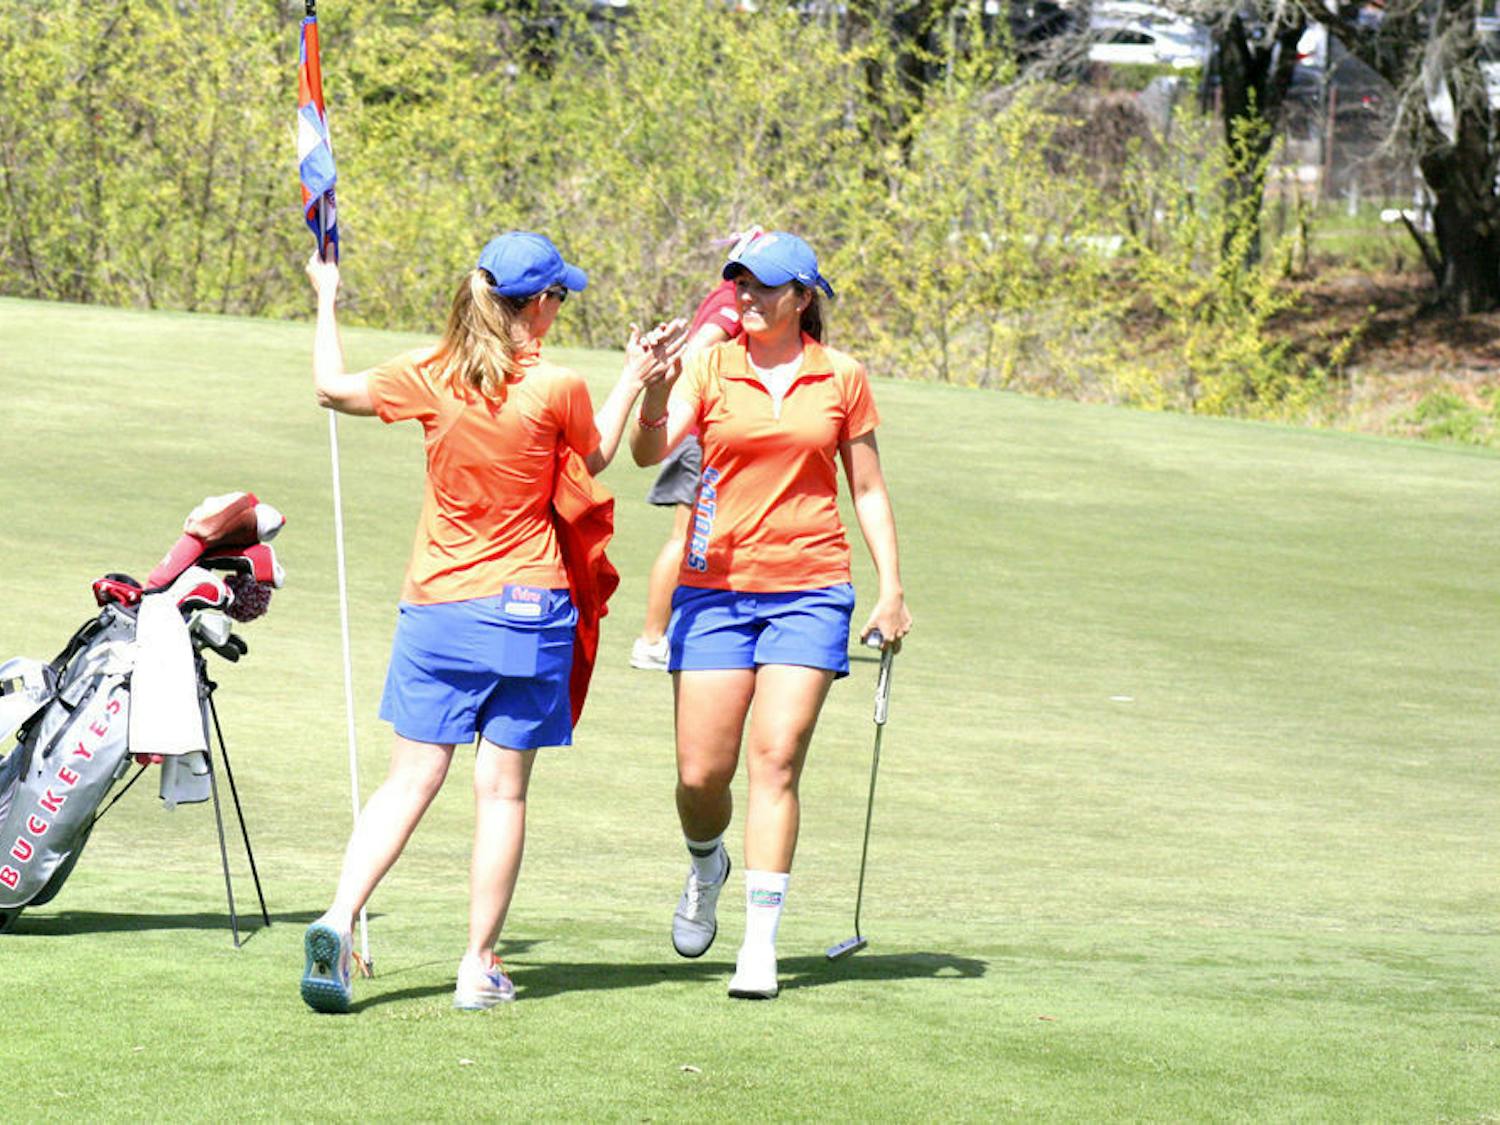 Despite many distractions and obstacles in the fall, the Gators women's golf team is preparing for a strong spring season.